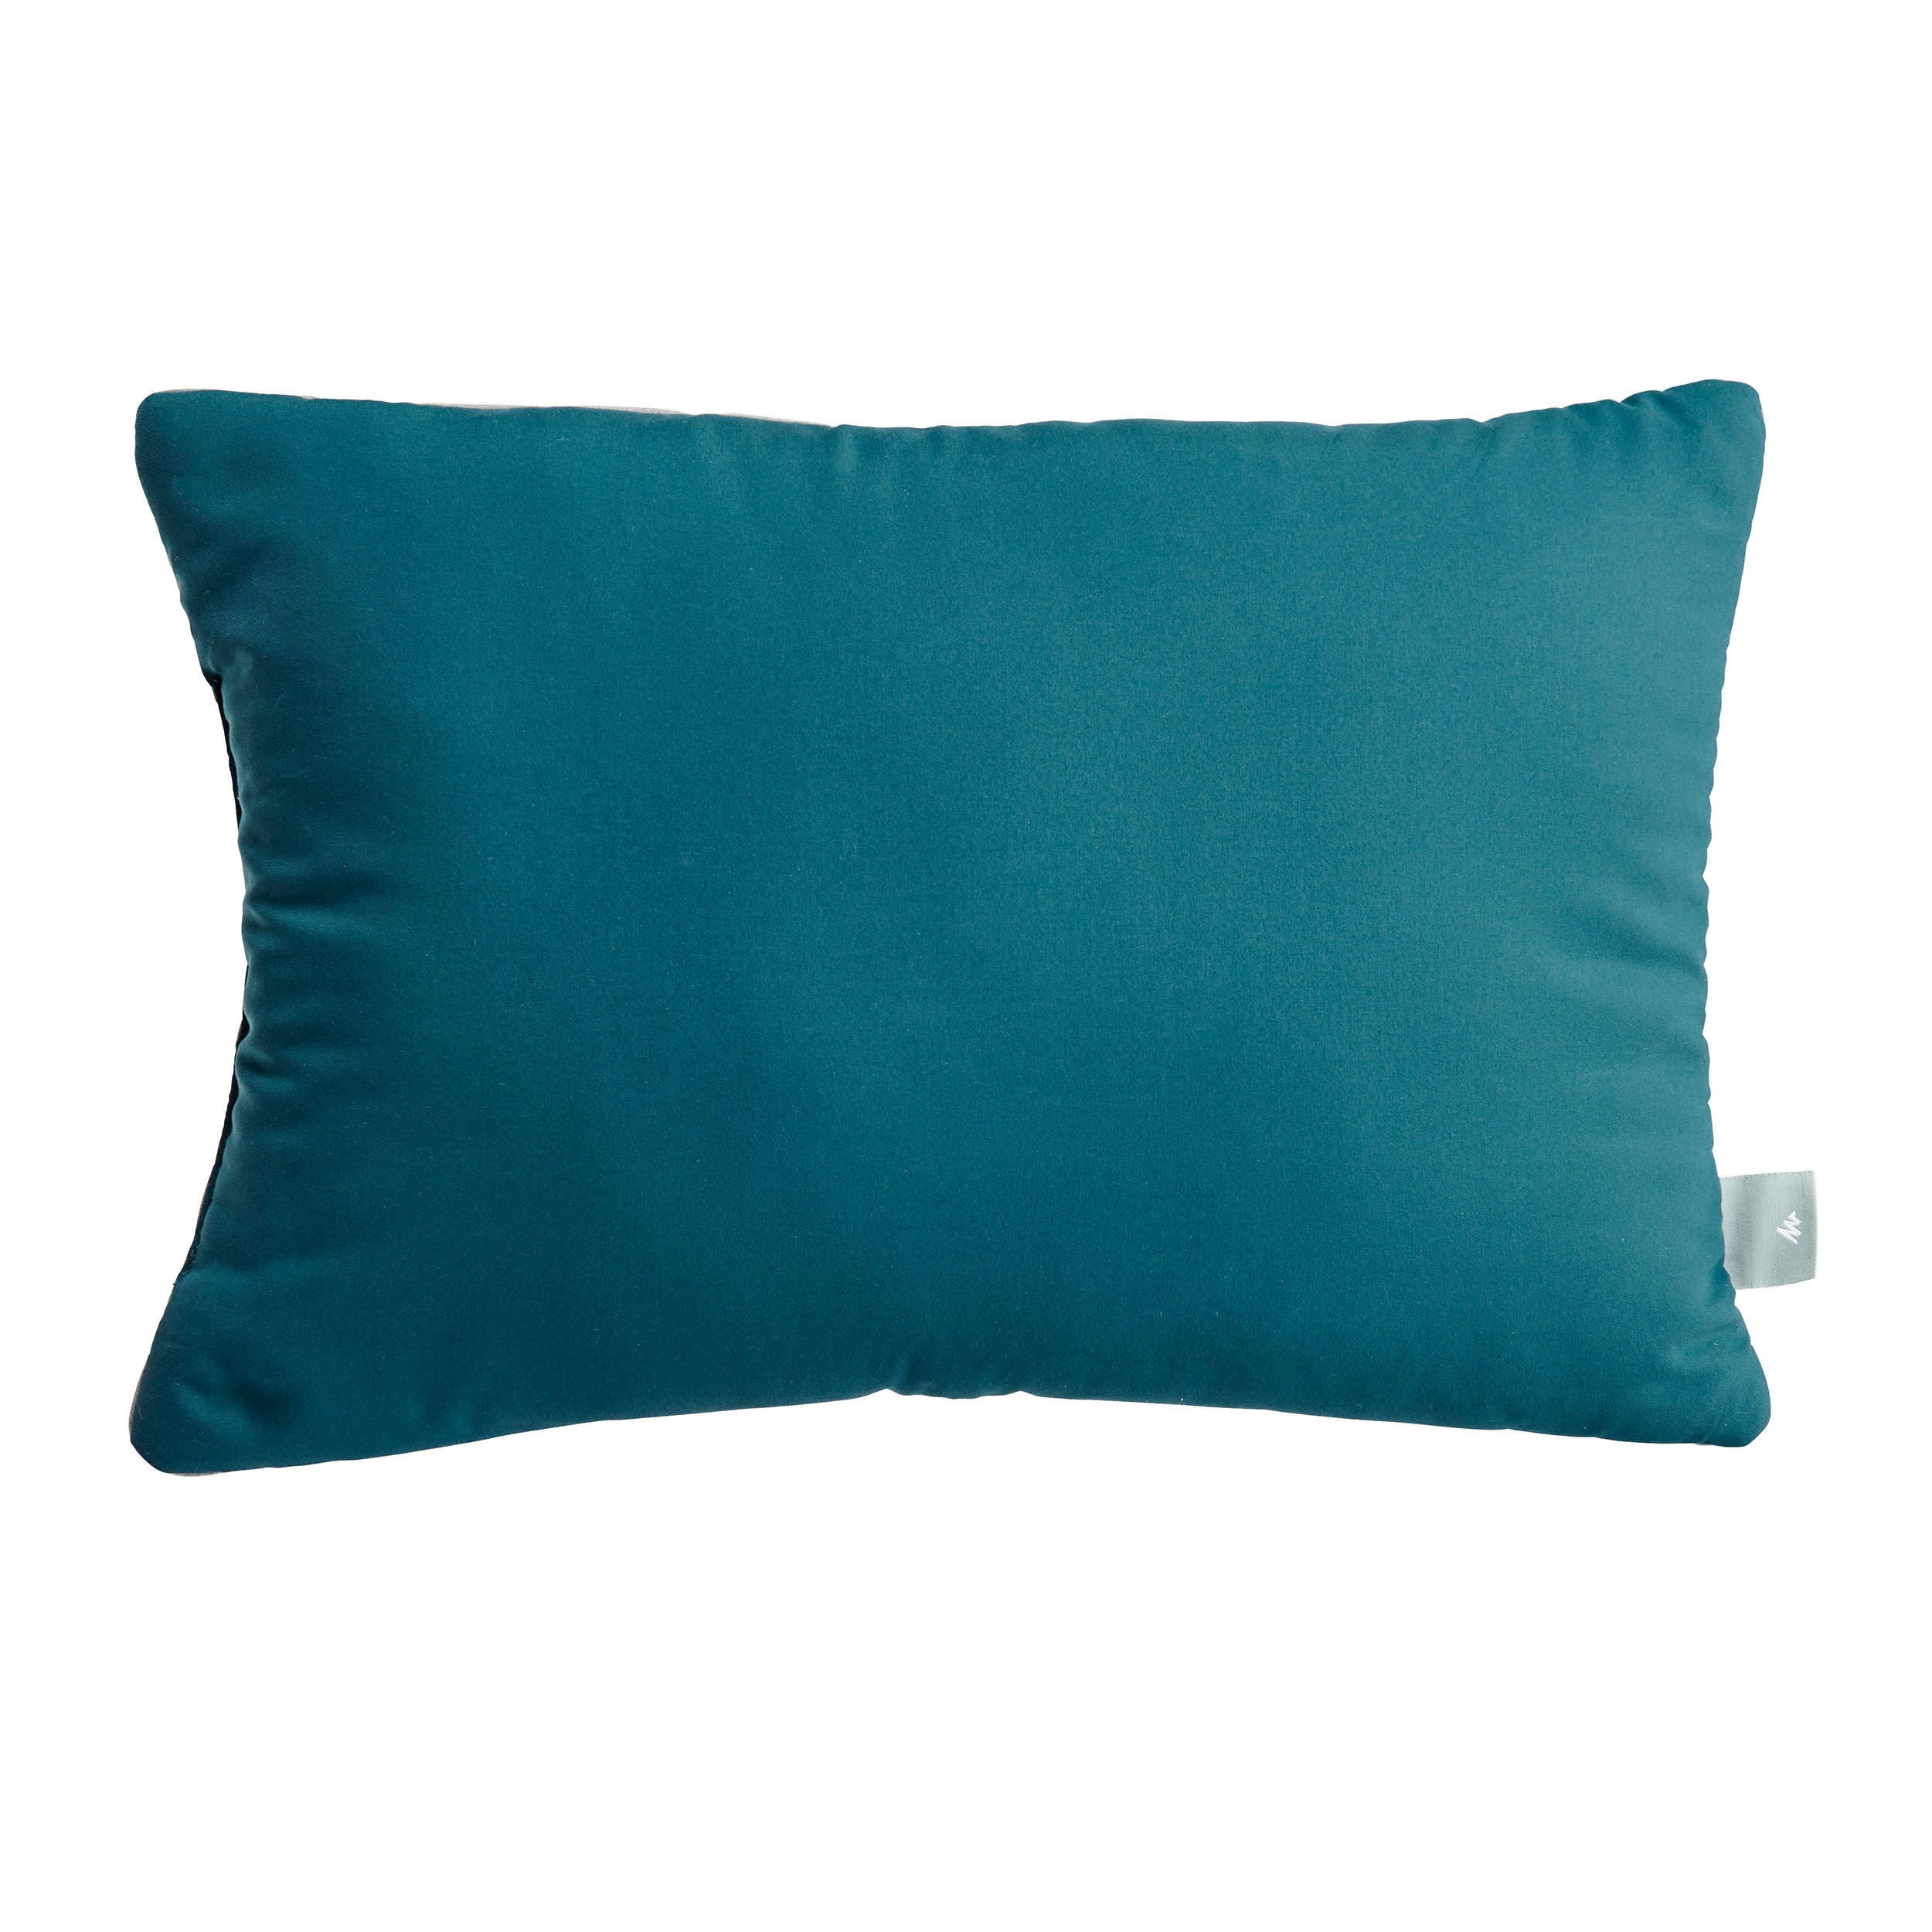 The Original Pillow with a Hole™ - For Ear Pain and CNH.